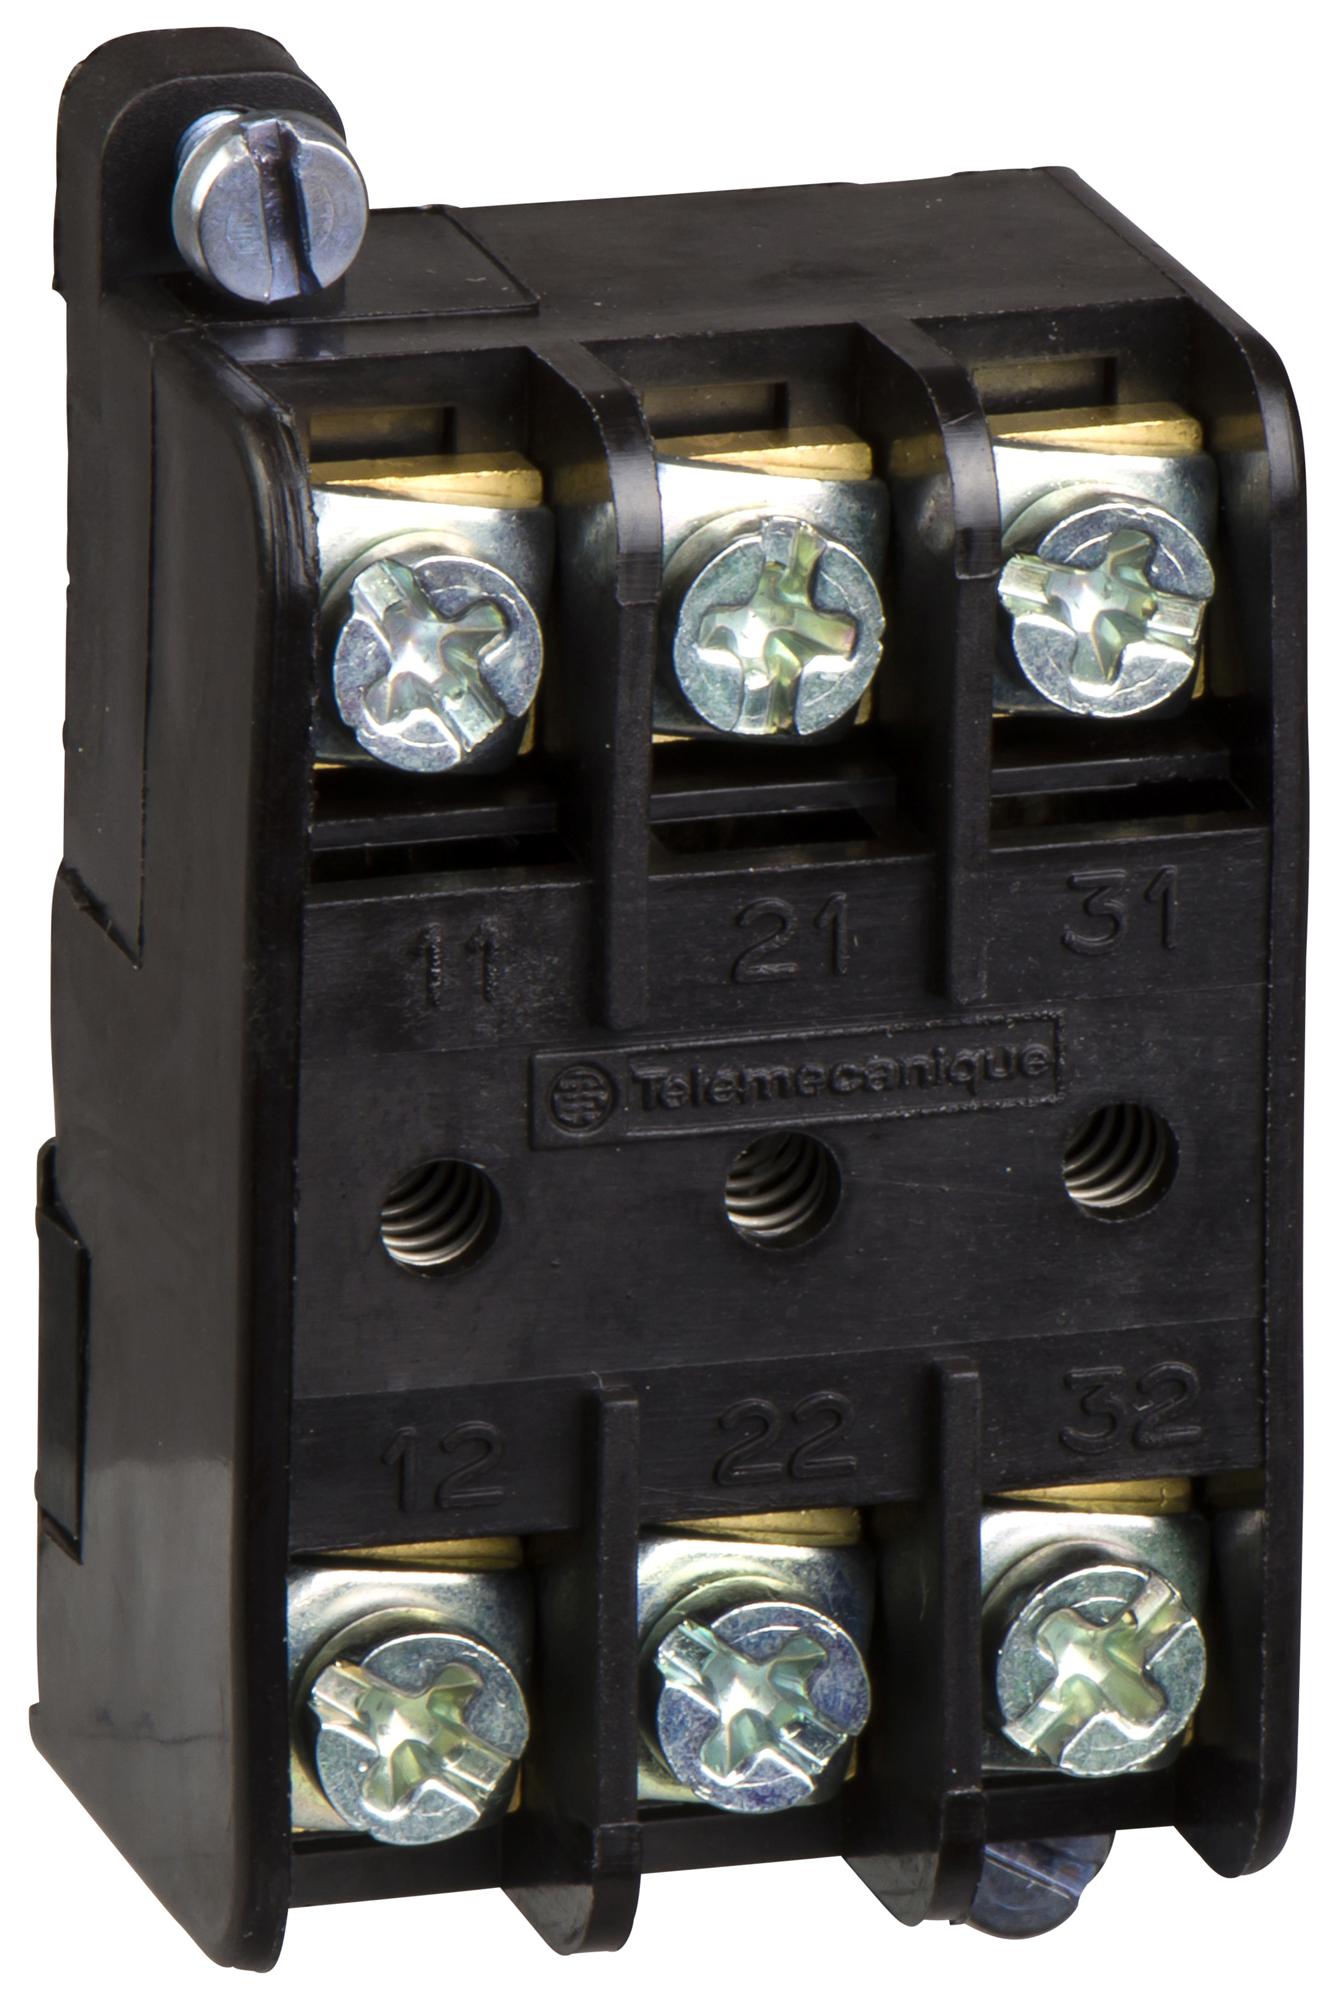 SCHNEIDER ELECTRIC Contact Blocks XENT2991 CONTACT BLOCK SCHNEIDER ELECTRIC 3114869 XENT2991